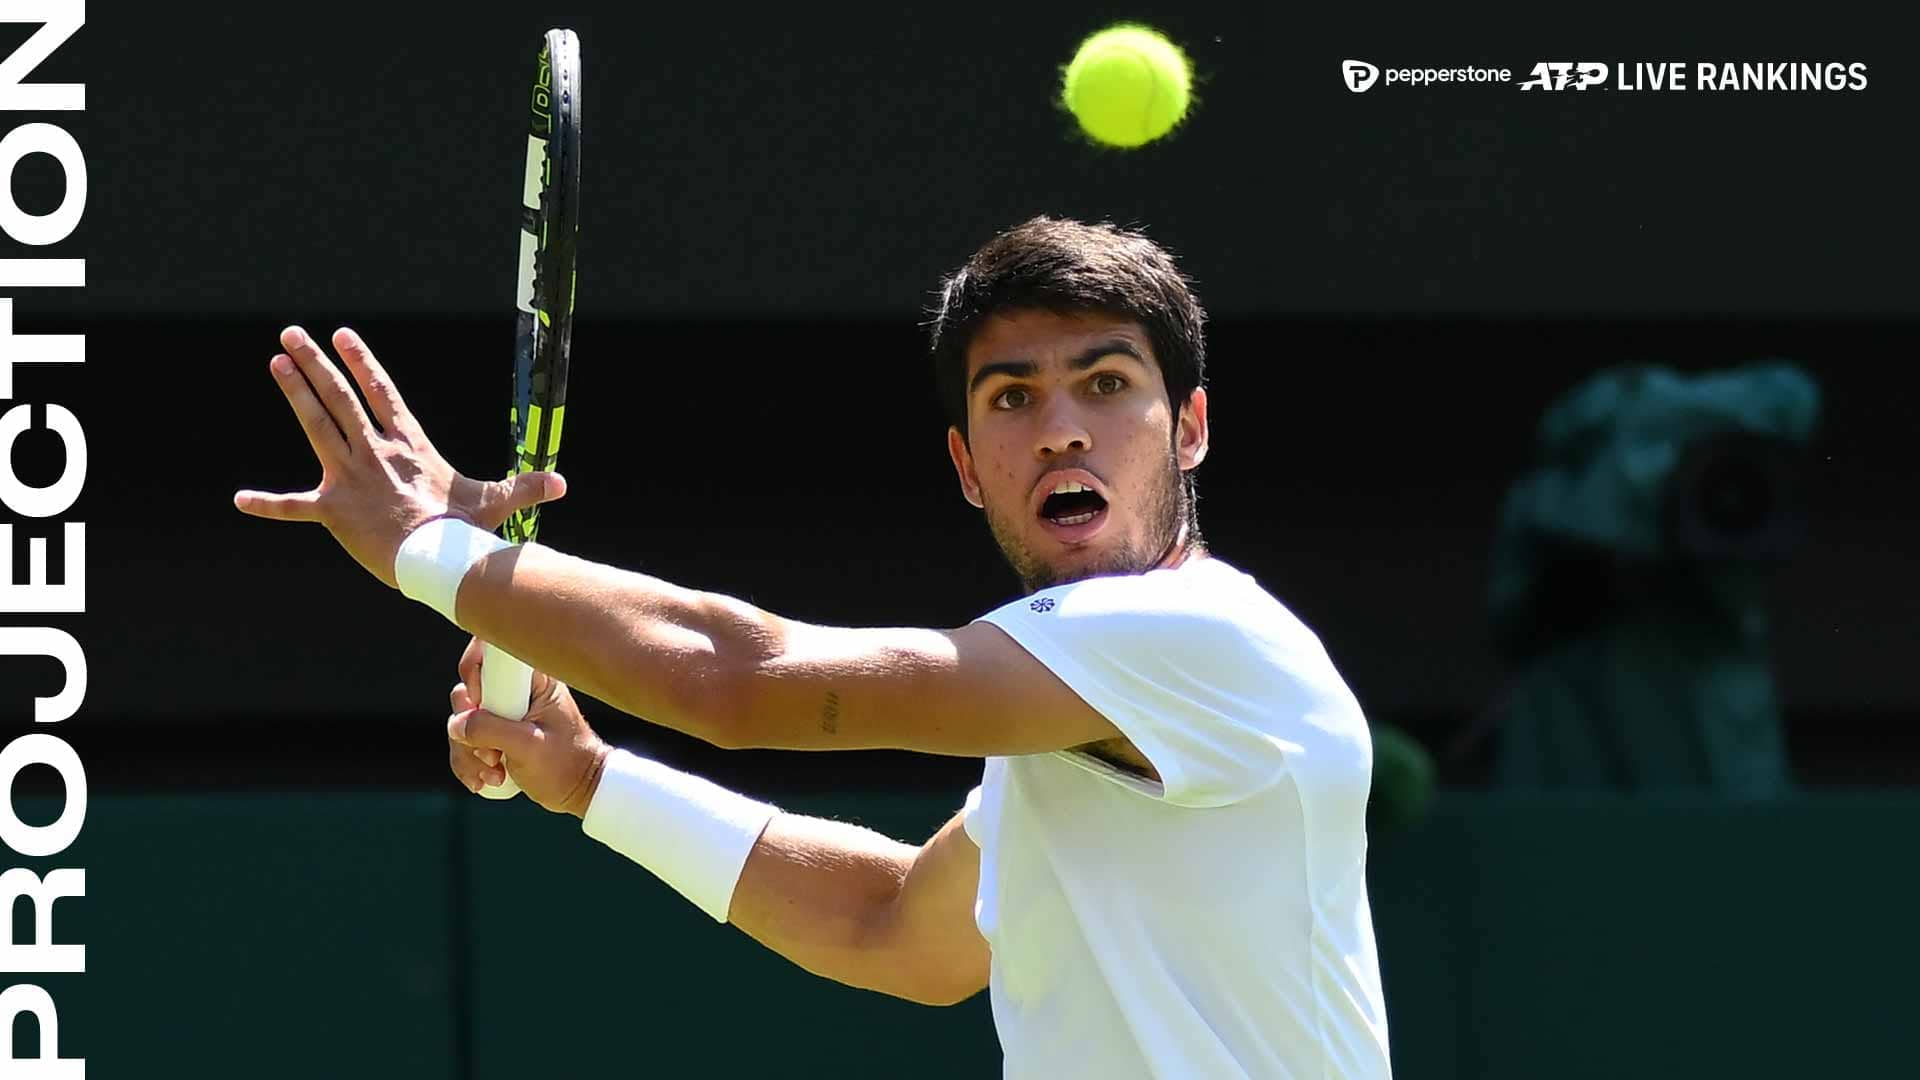 Carlos Alcaraz is No. 1 in the Pepperstone ATP Live Rankings entering the Wimbledon semi-finals.